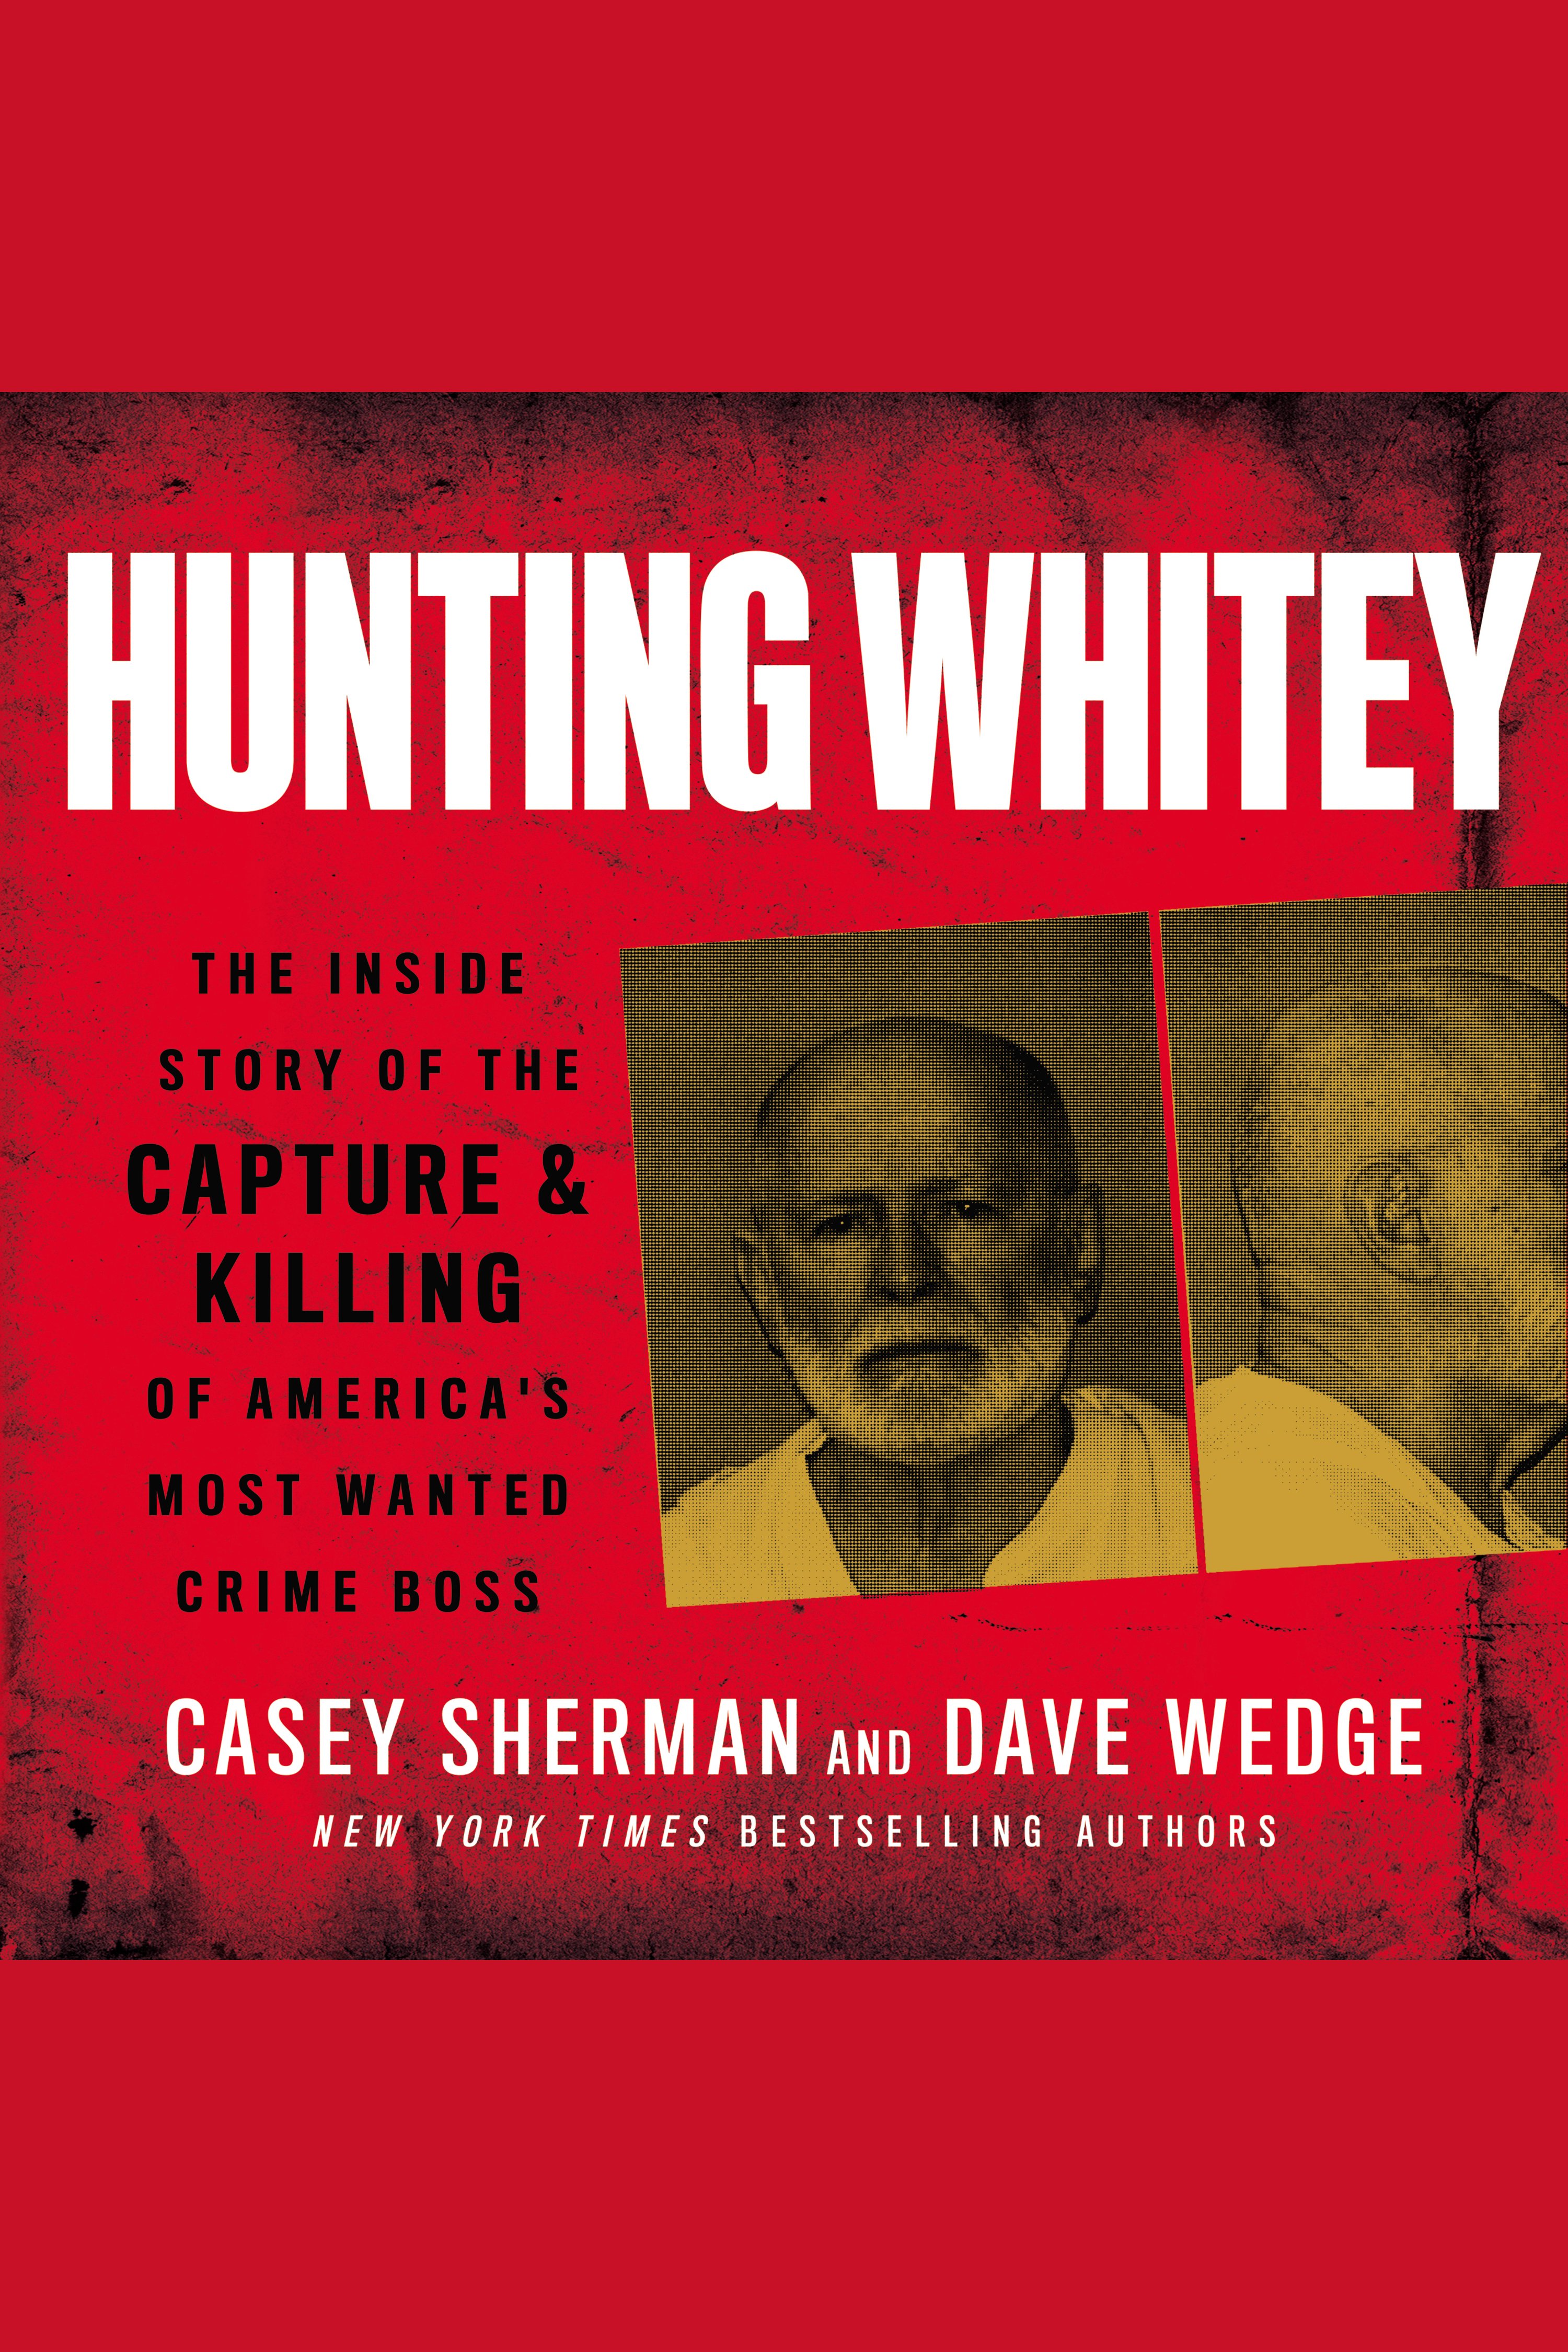 Hunting Whitey The Inside Story of the Capture & Killing of America's Most Wanted Crime Boss cover image